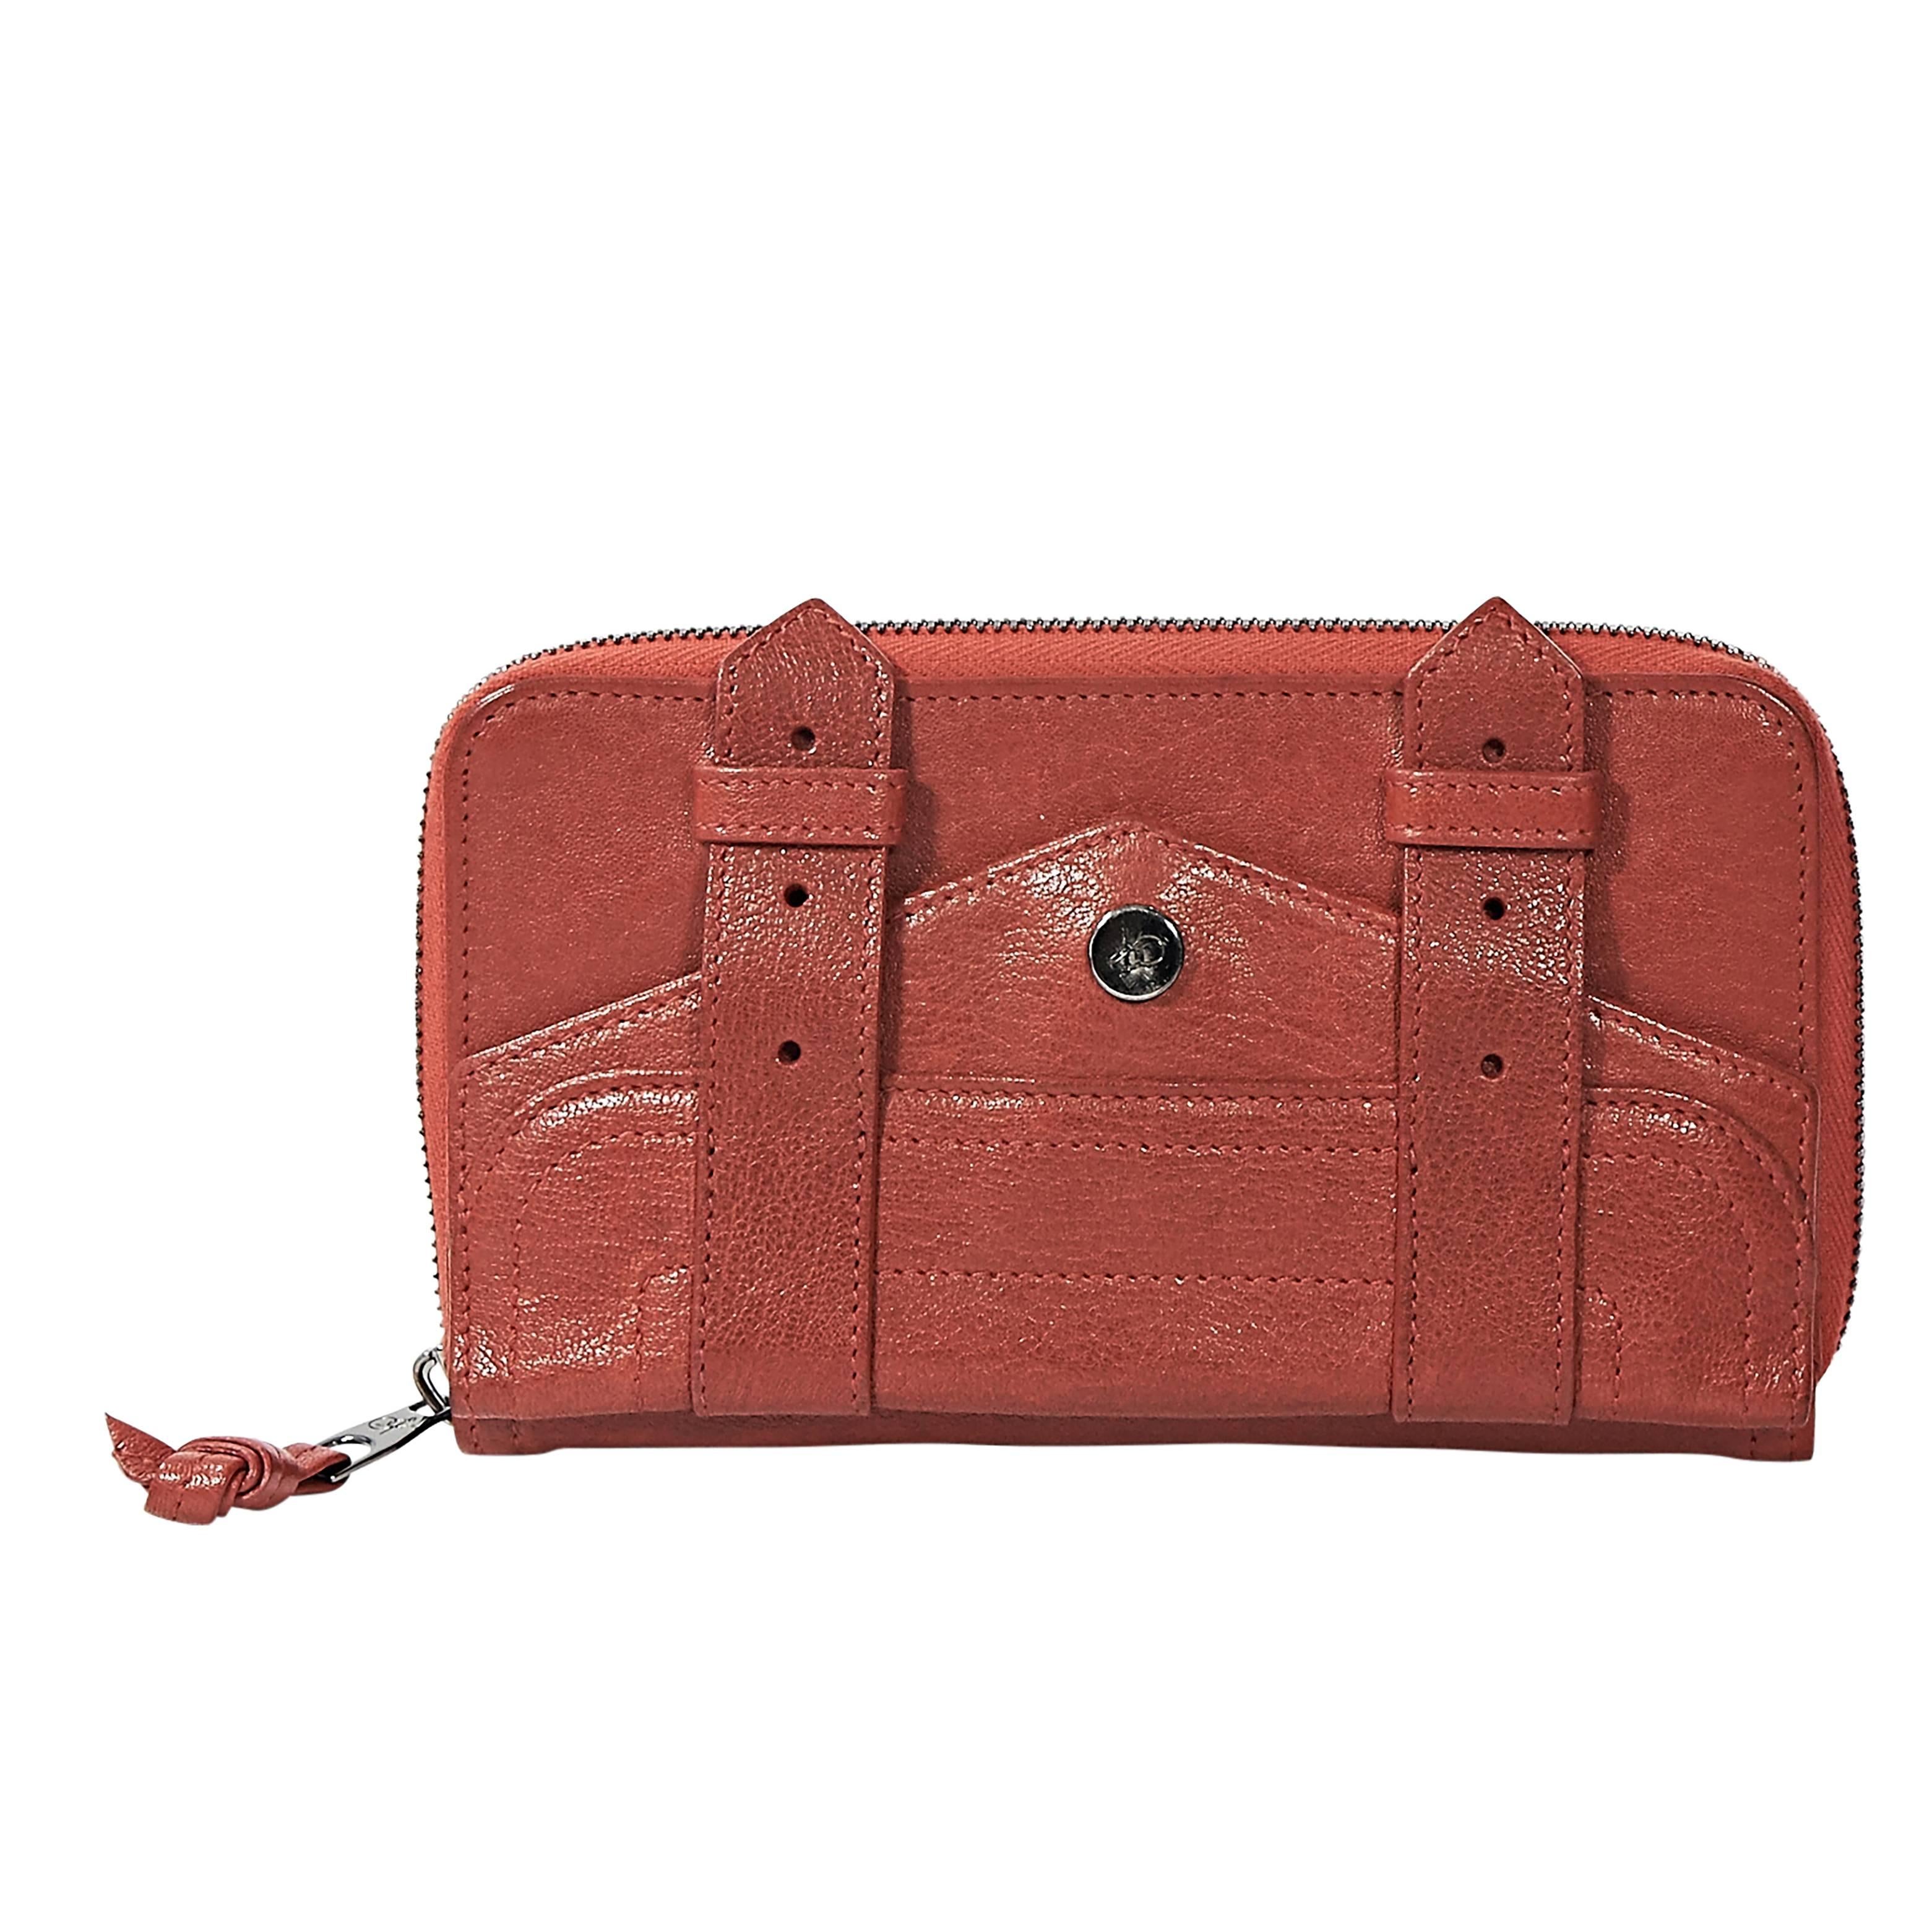 Red Proenza Schouler PS1 Leather Wallet